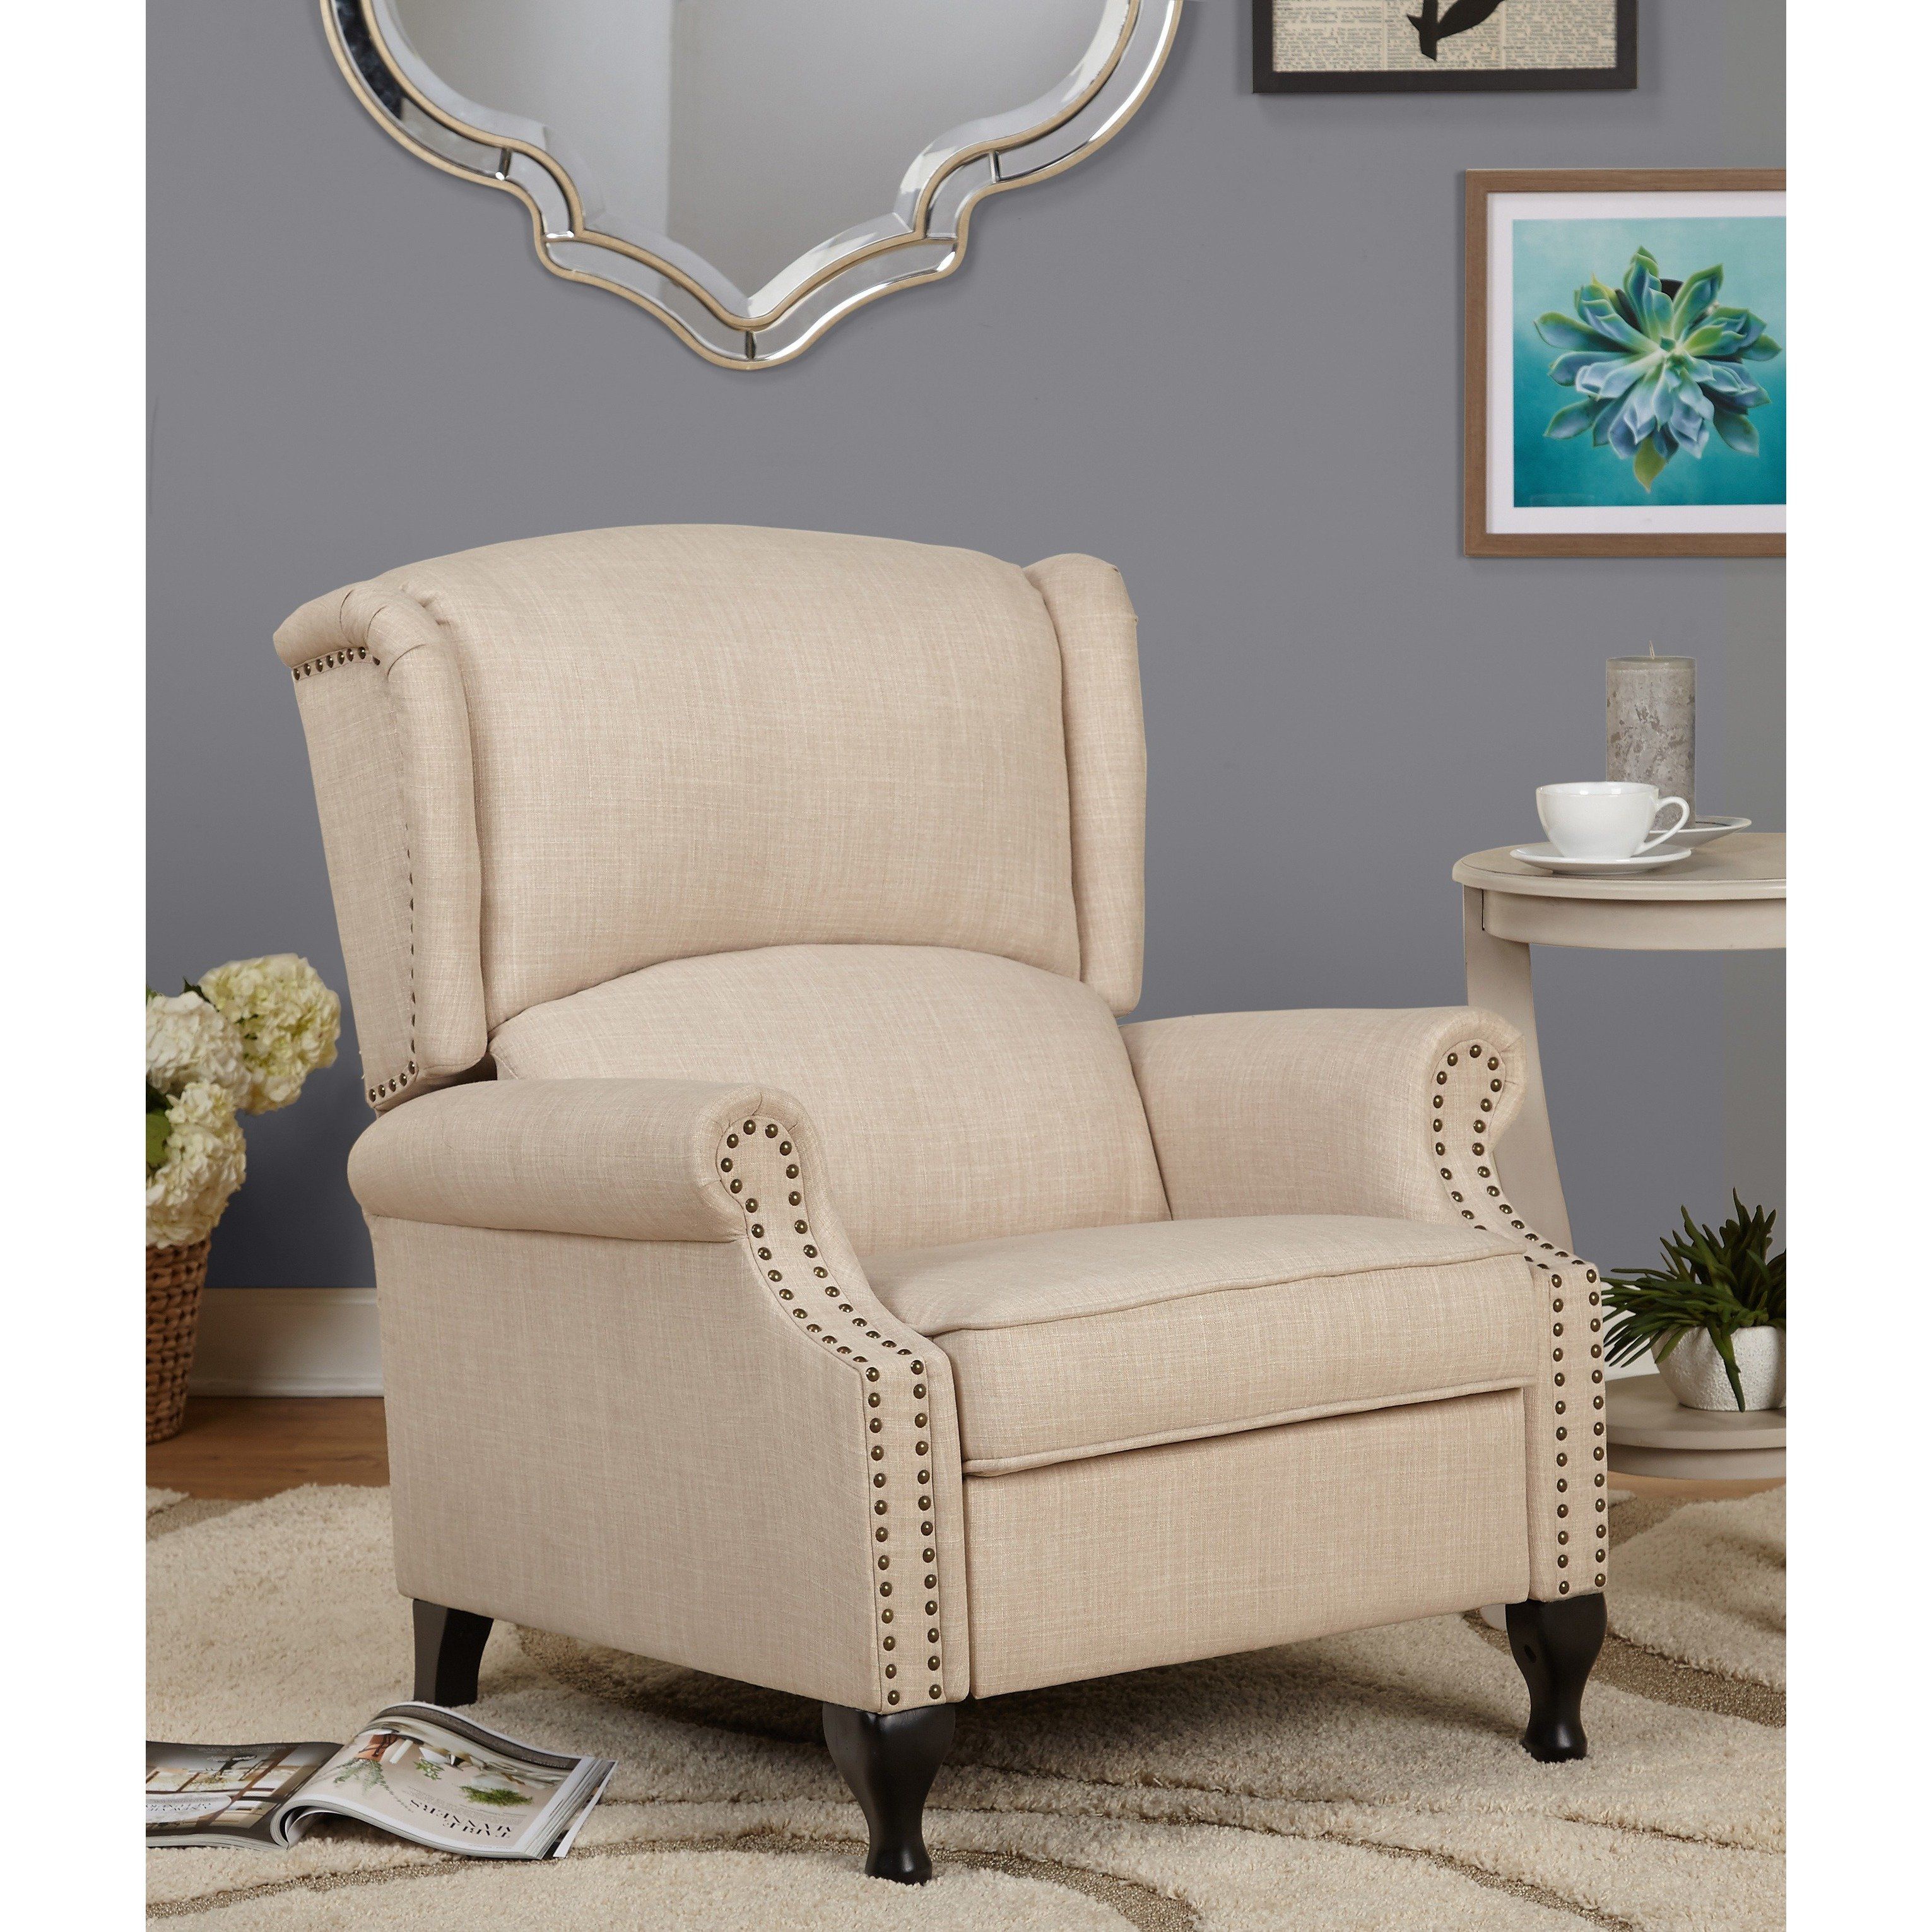 Shop Simple Living Upholstered Wing Recliner – Free Shipping Today Regarding Franco Iii Fabric Swivel Rocker Recliners (View 15 of 25)